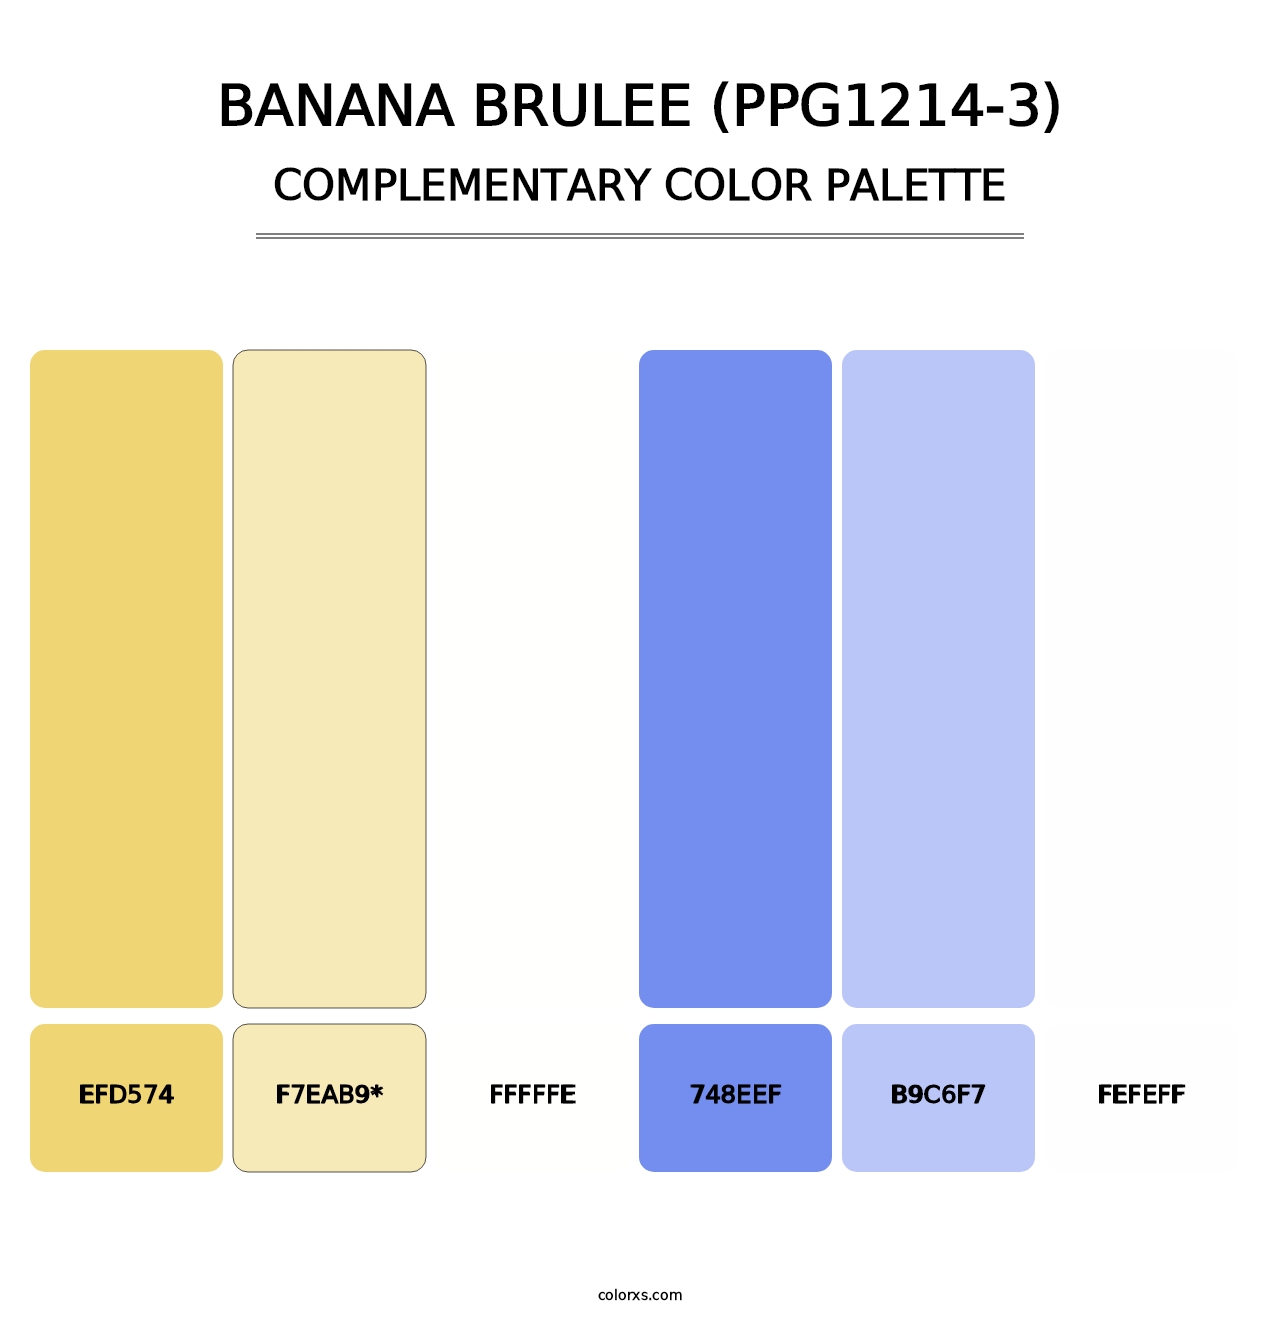 Banana Brulee (PPG1214-3) - Complementary Color Palette